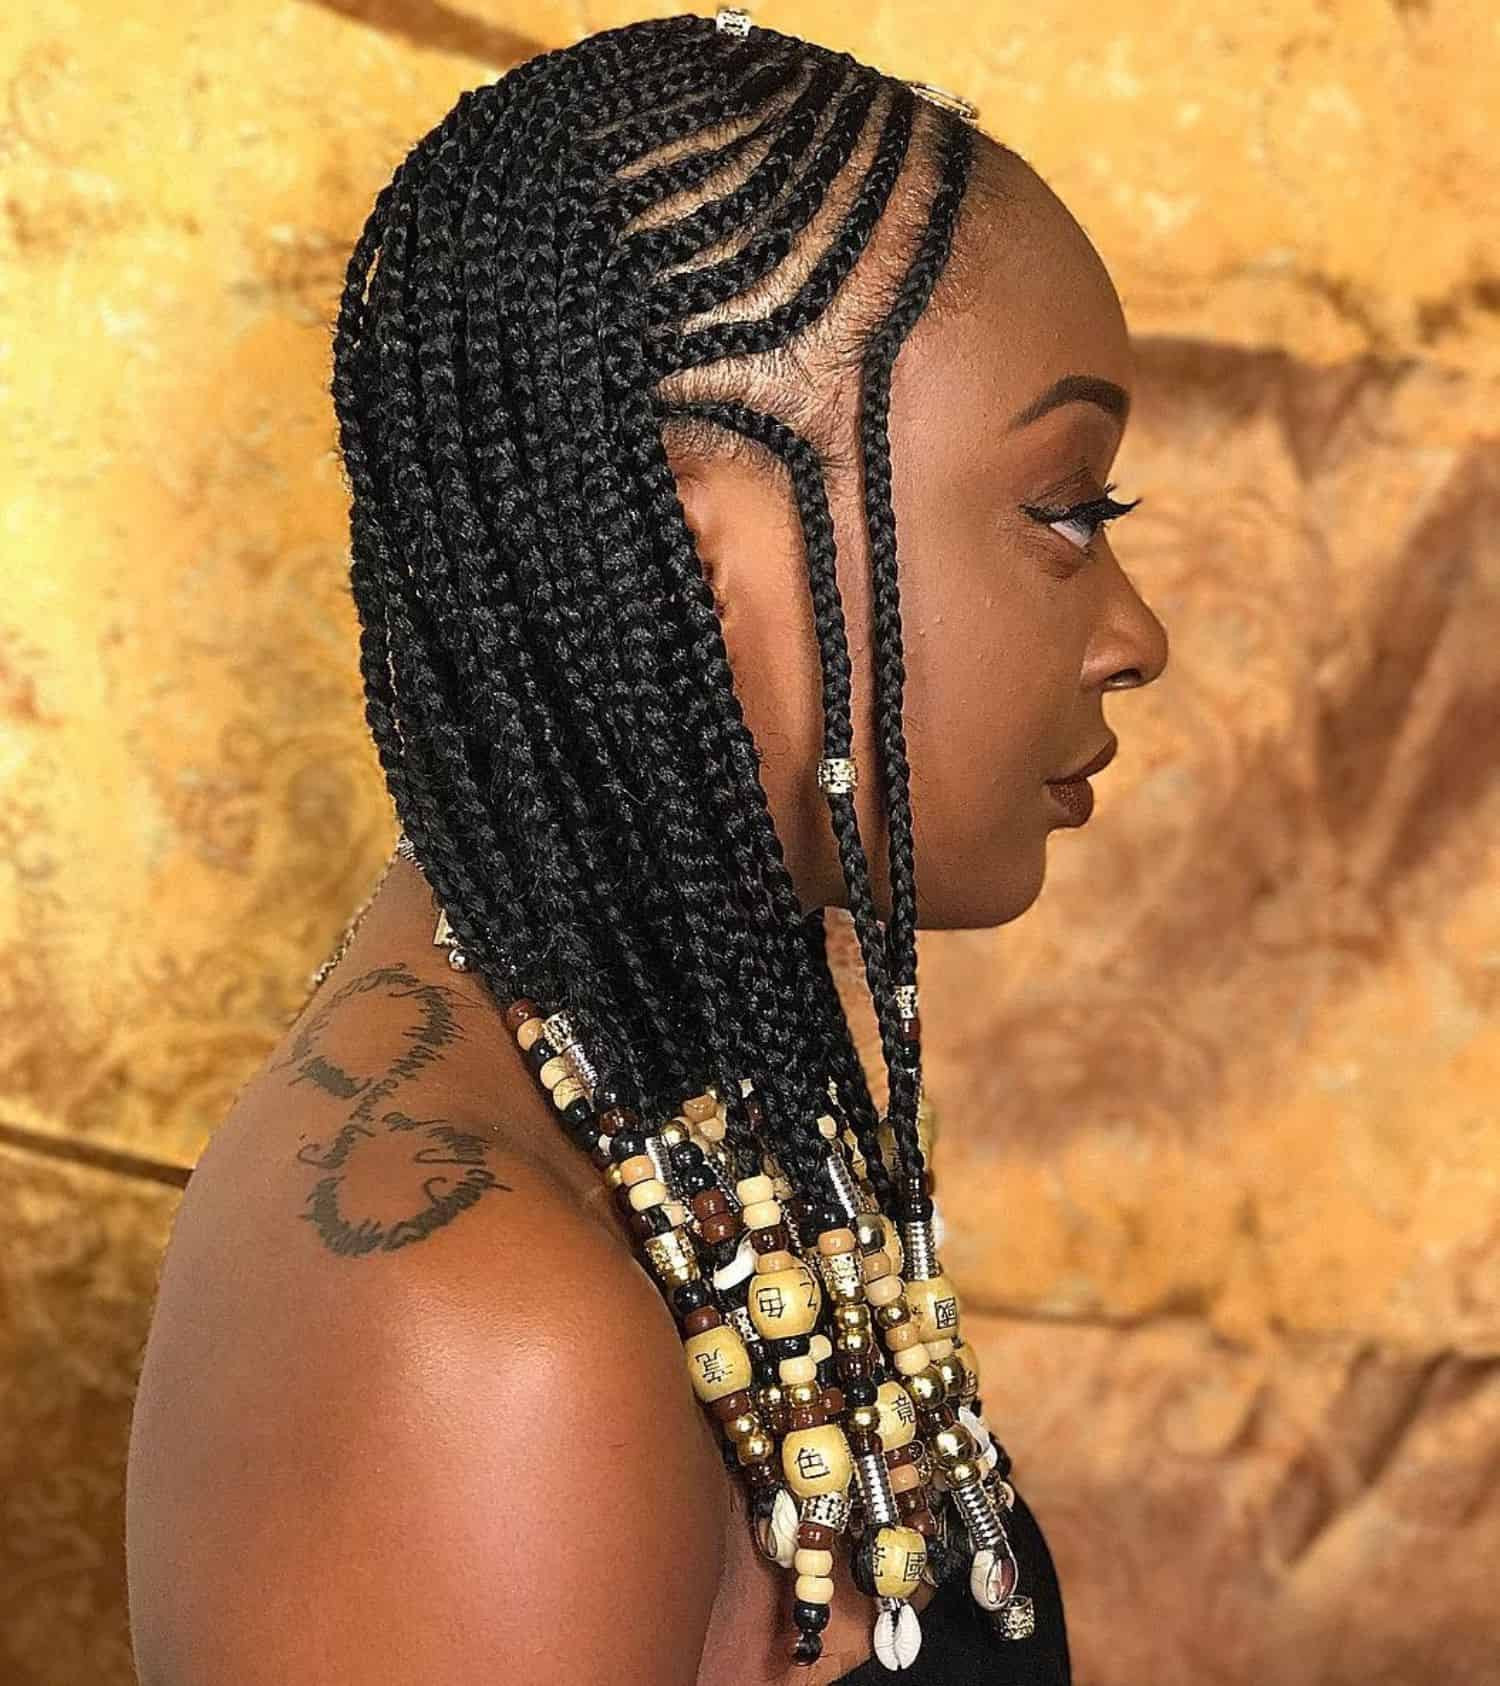 Black Girl Cornrow Hairstyles
 30 Black Braided Hairstyles You Can Try For a Fancy